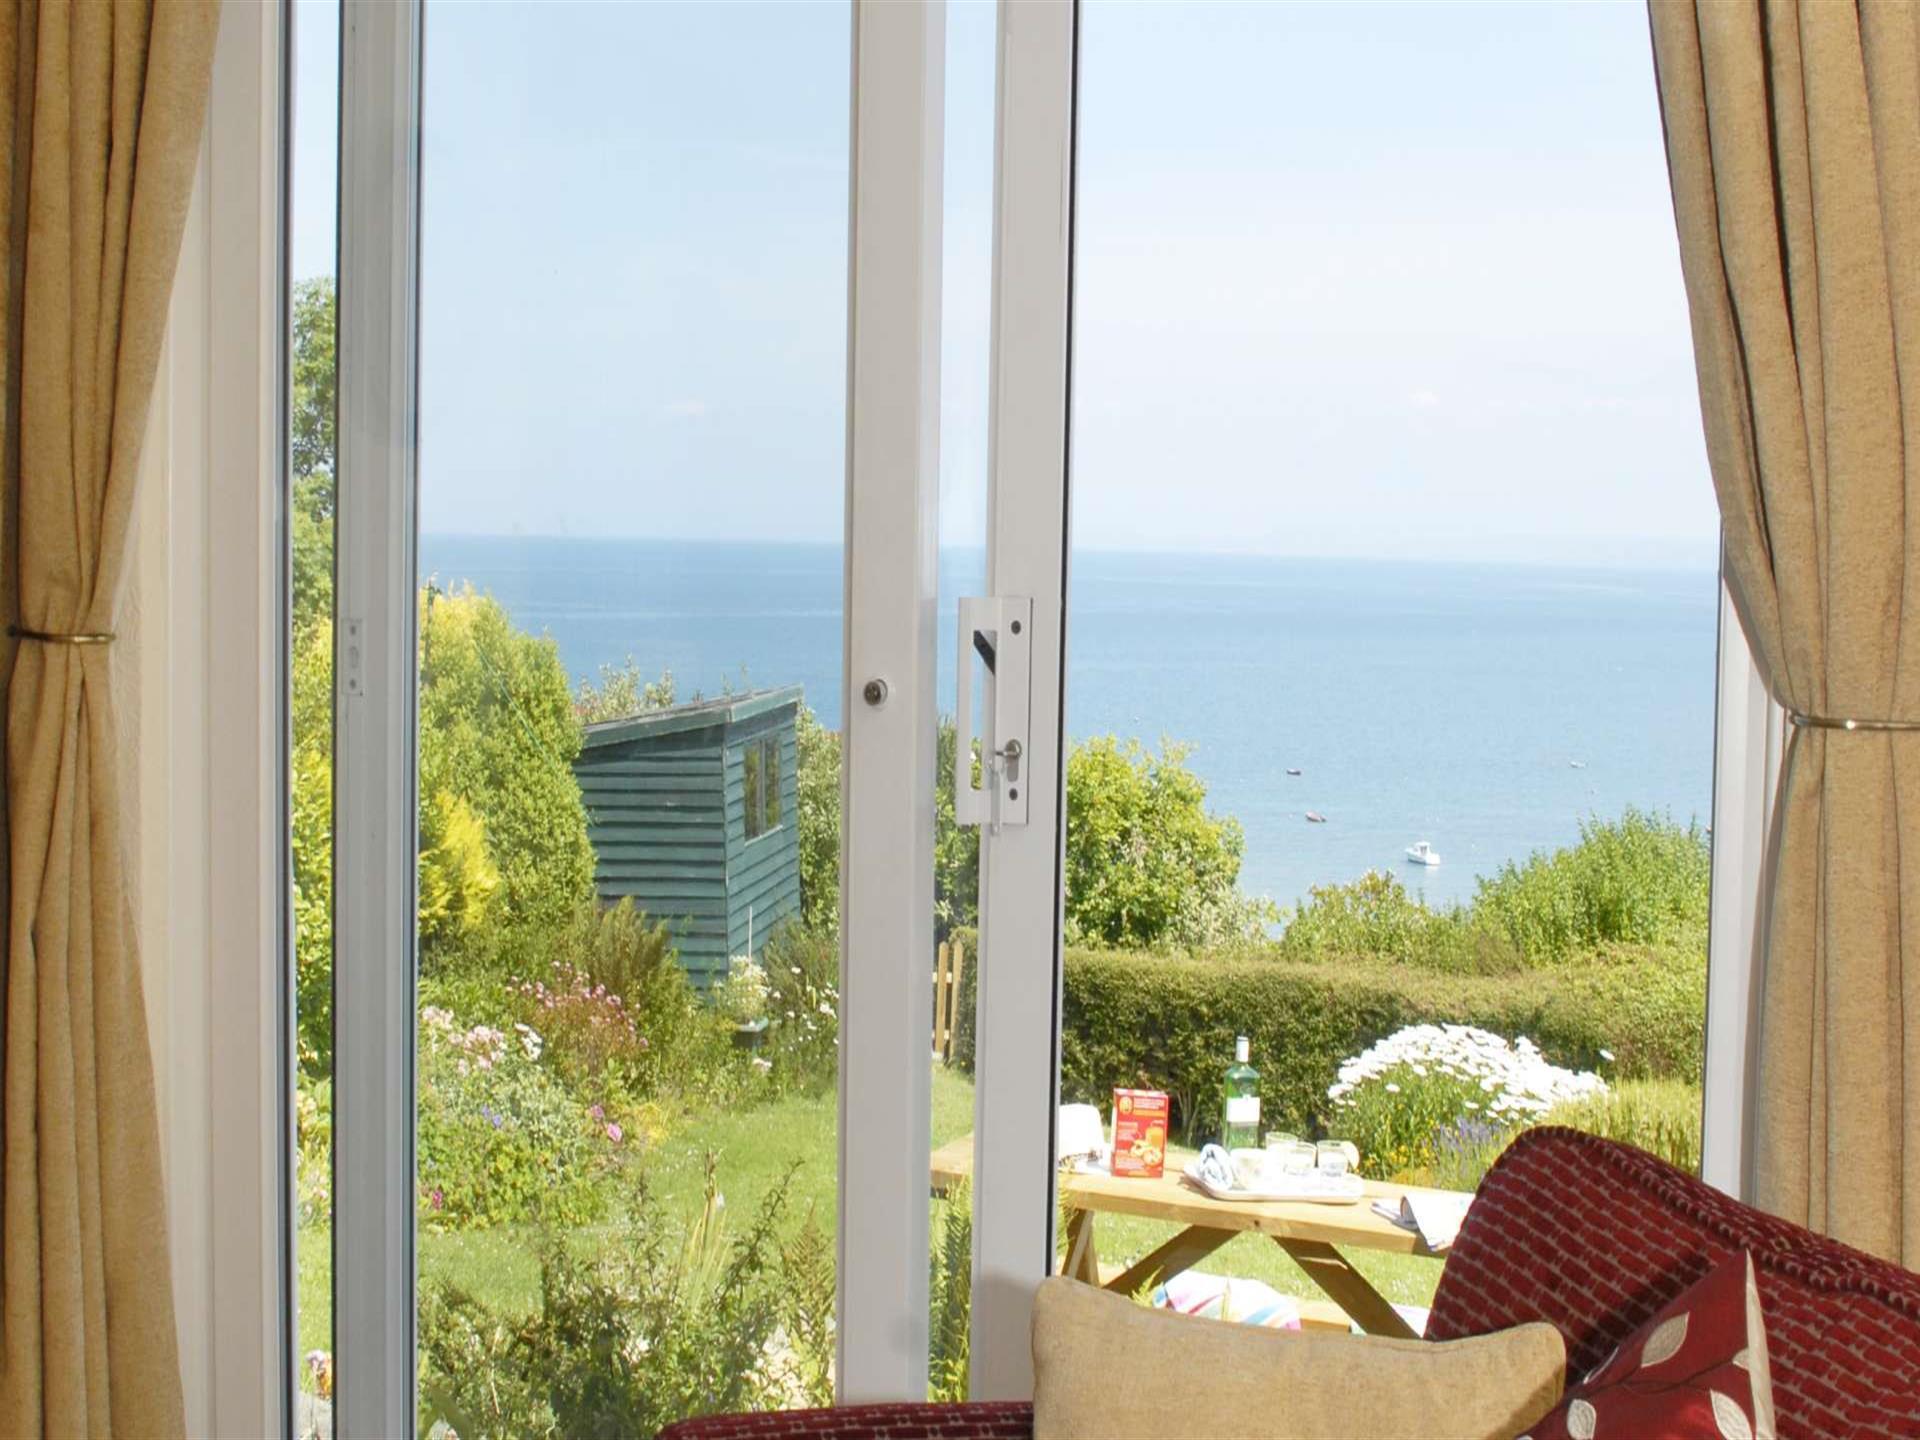 Views over the garden to the sea from the lounge